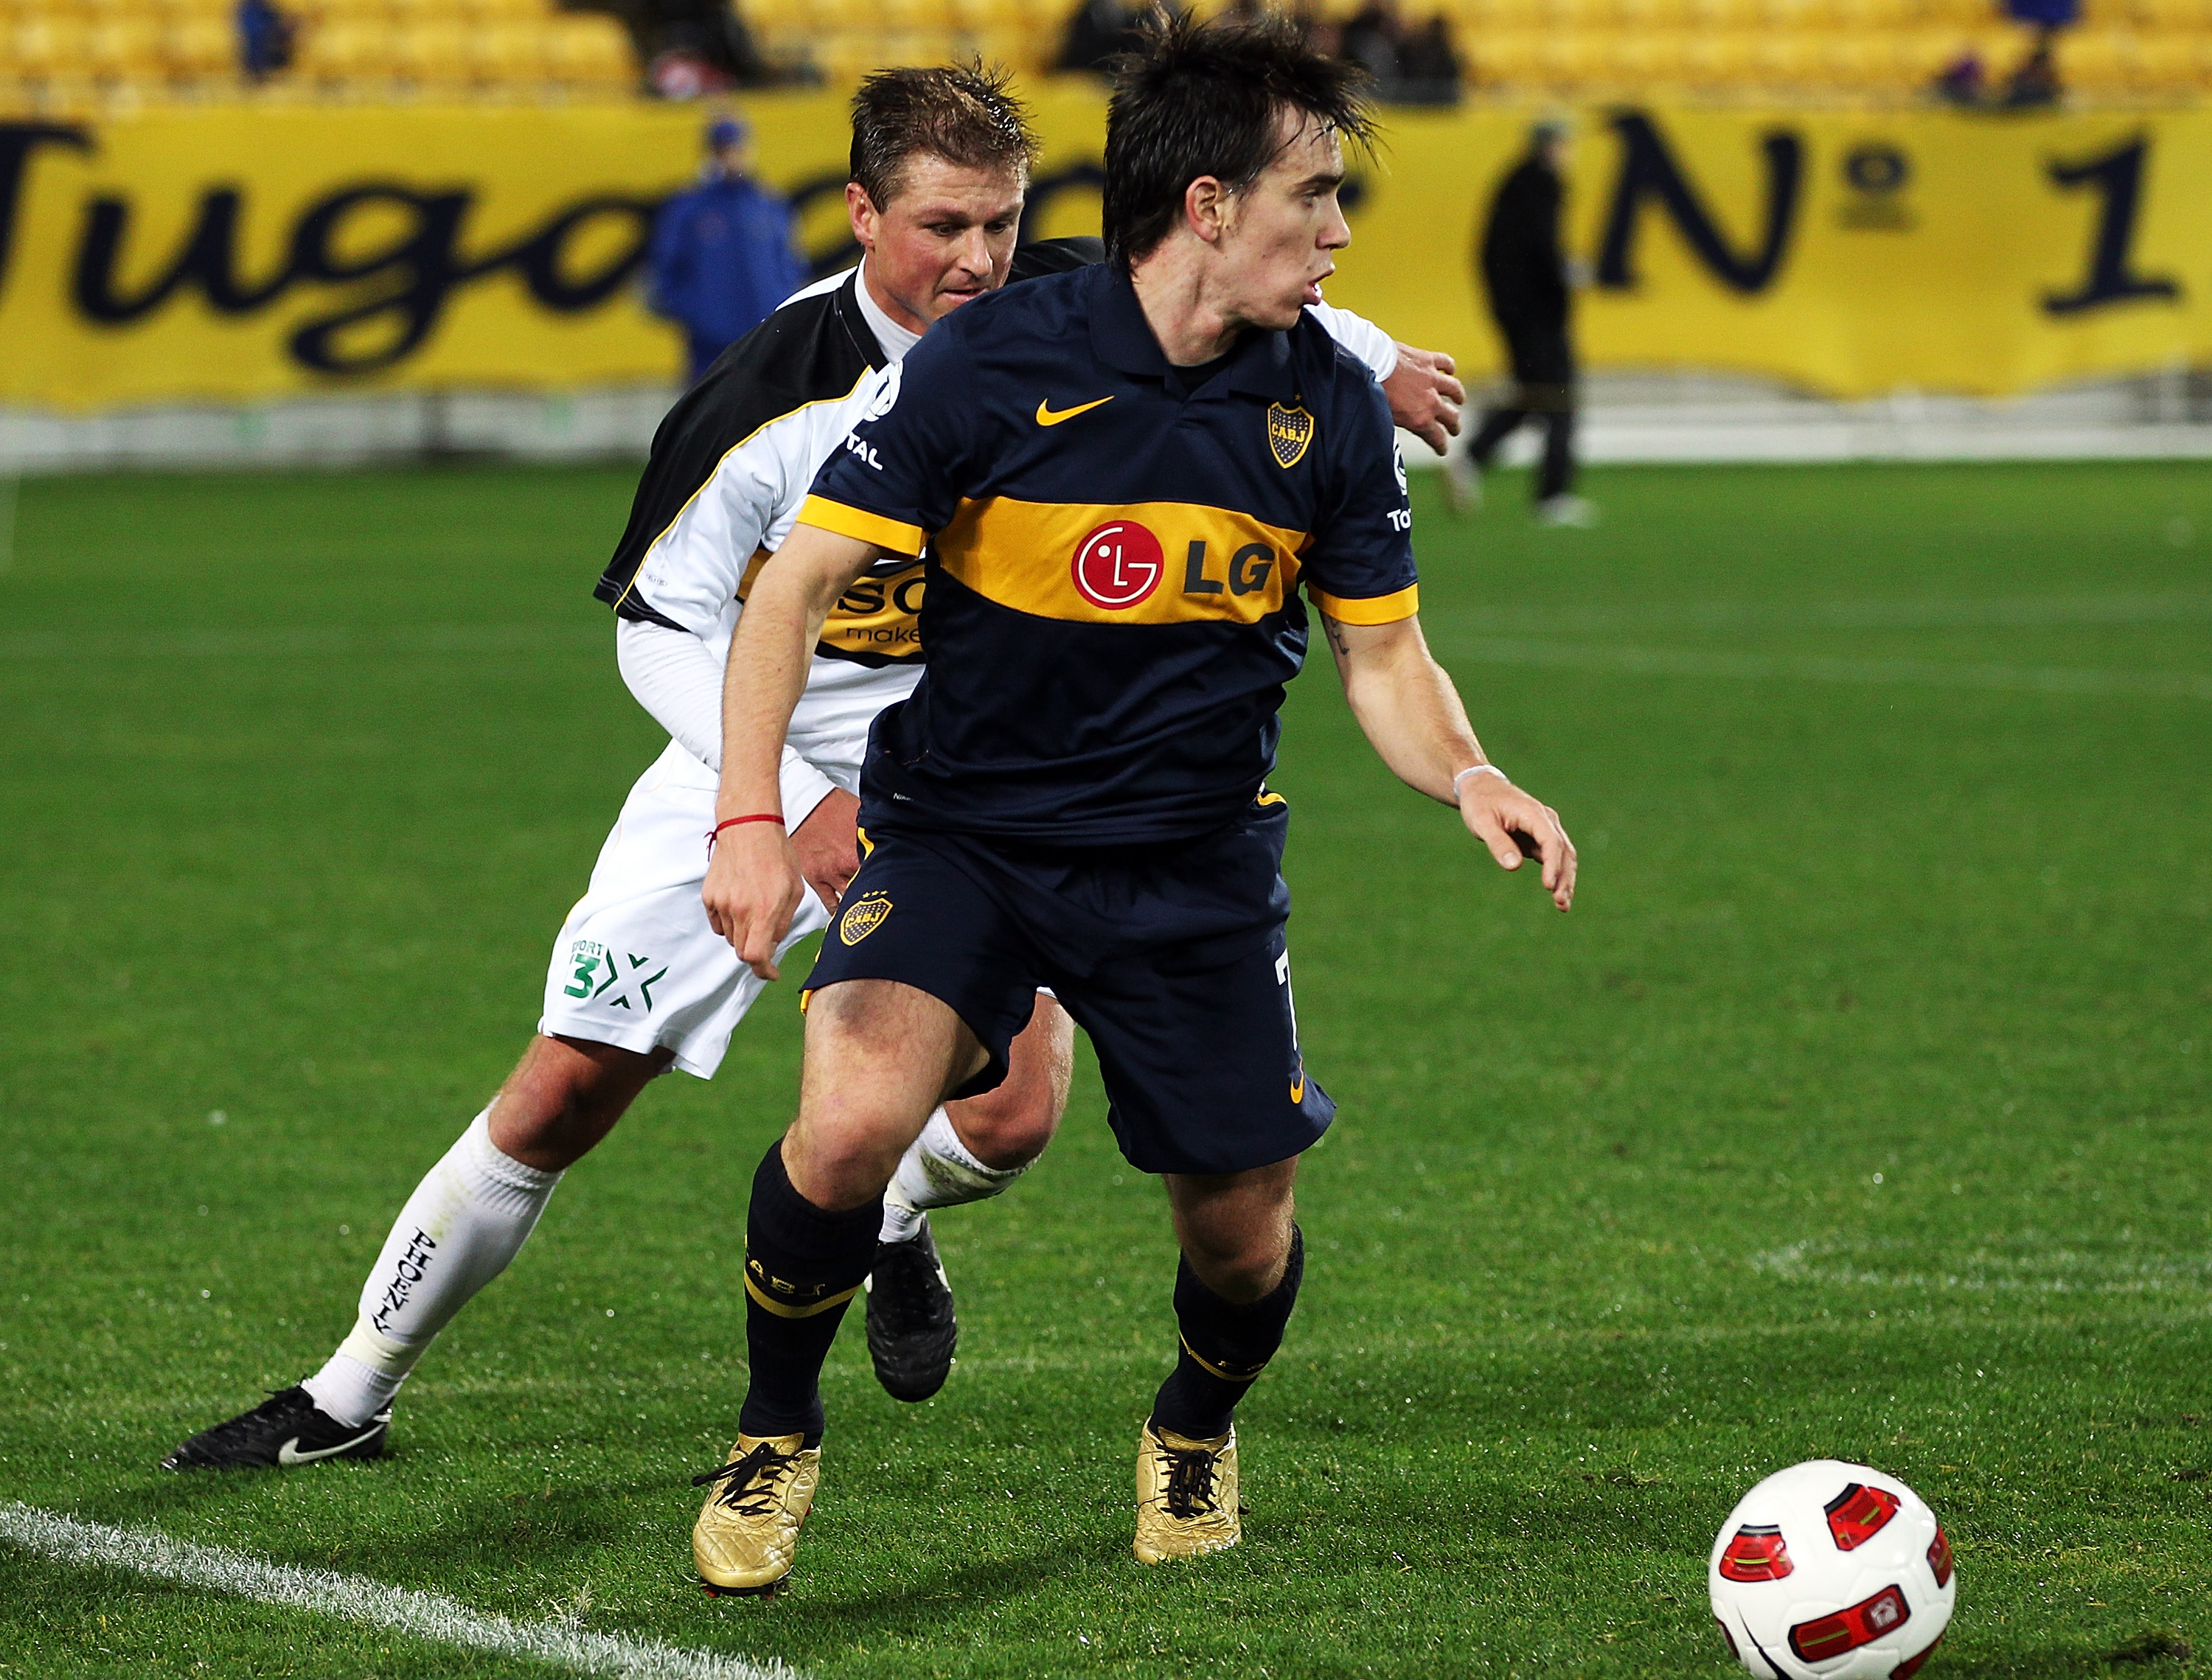 WELLINGTON, NEW ZEALAND - JULY 23:  Pablo Mouche of the Boca Juniors gets past Ben Sigmund of the Phoenix during the pre-season friendly match between Wellington Phoenix and Boca Juniors at Westpac Stadium on July 23, 2010 in Wellington, New Zealand.  (Ph